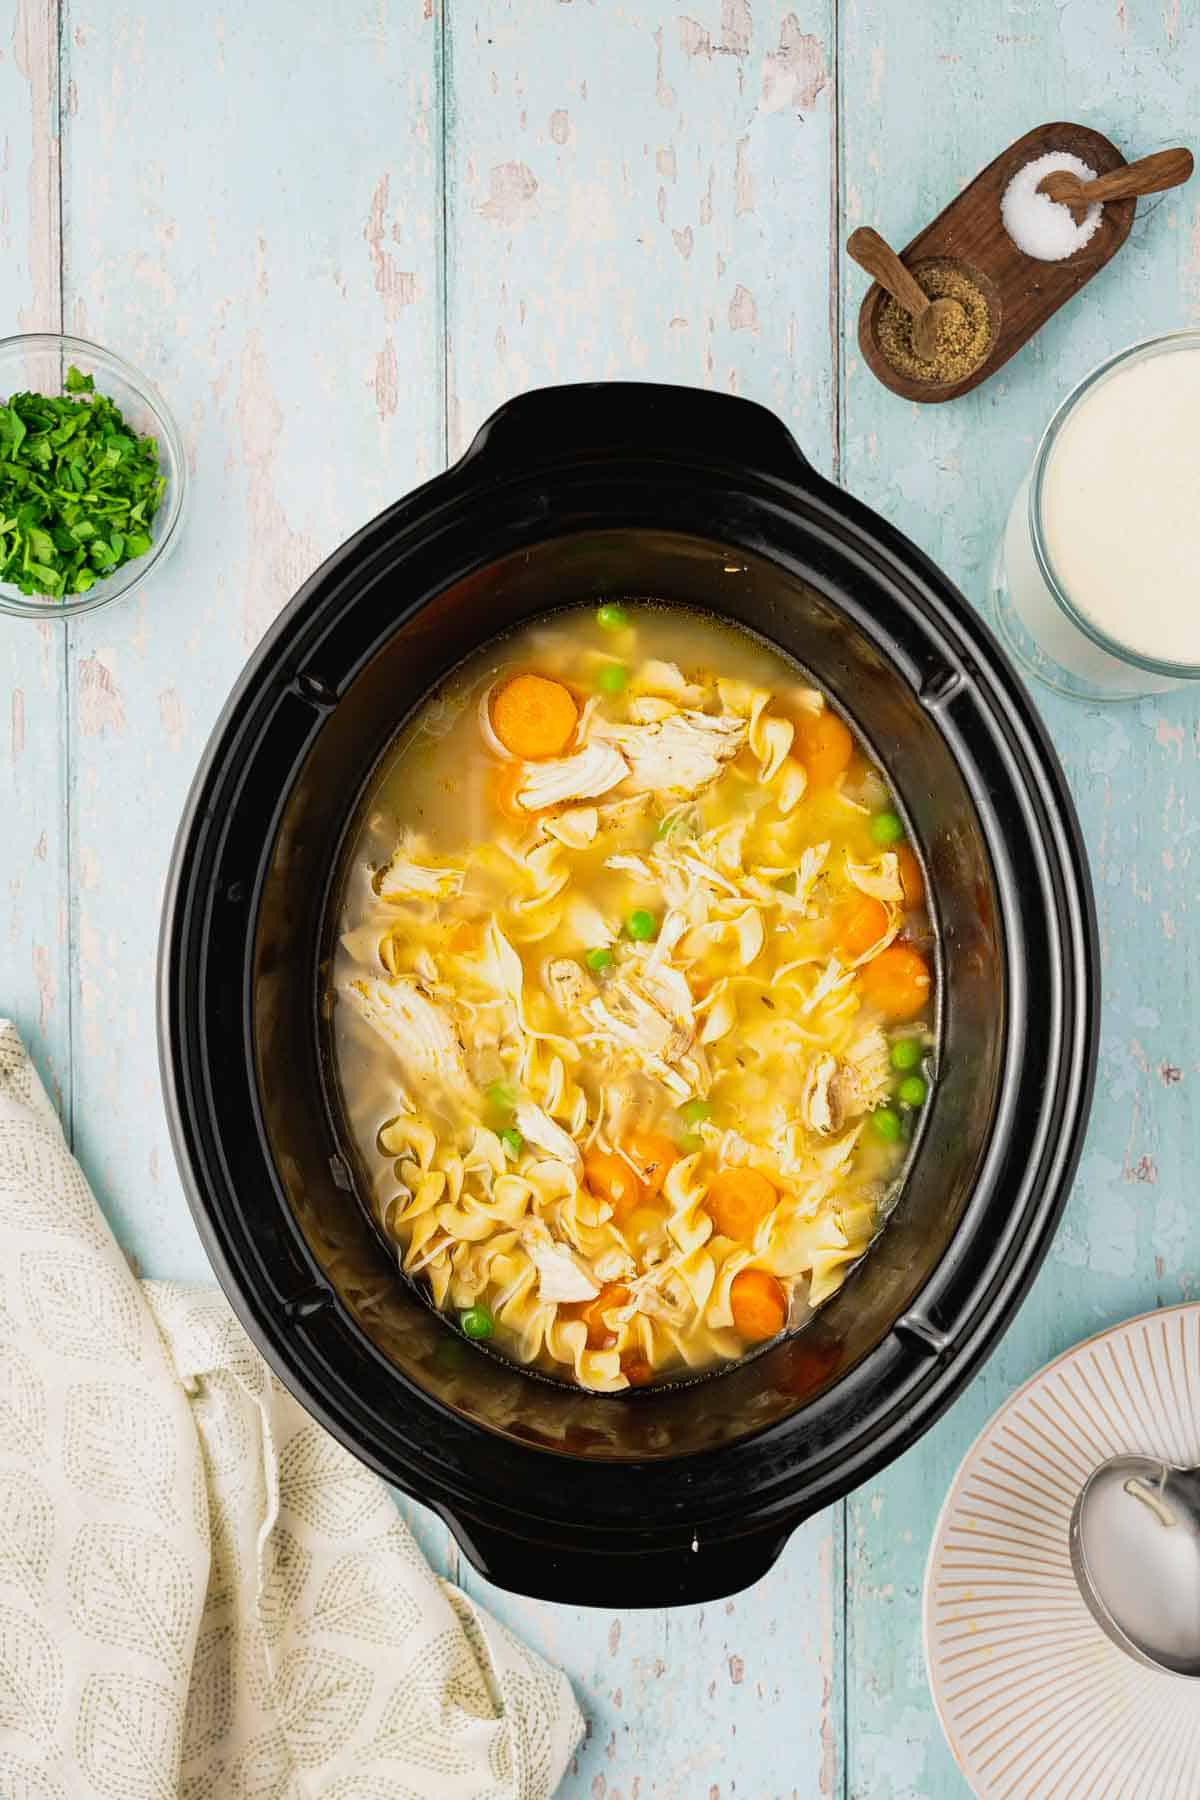 noodles, chicken and veggies in broth in a slow cooker